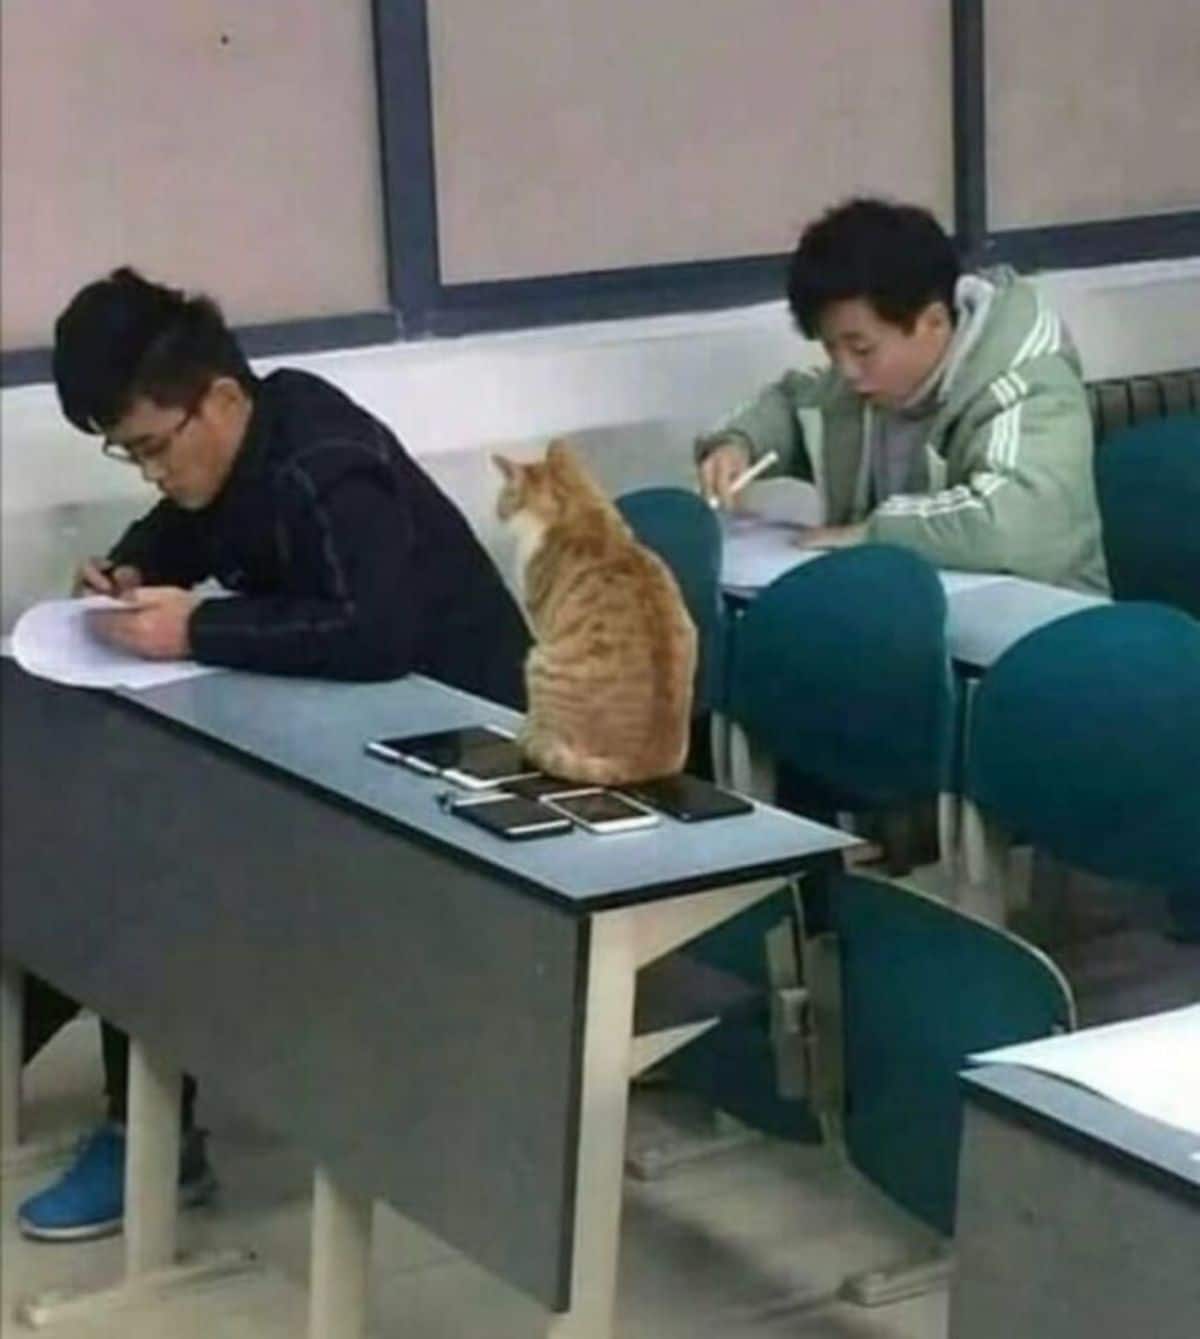 orange and white cat sitting on a pile of mobile phones on a table with a man doing an exam paper next to the cat and another man behind him